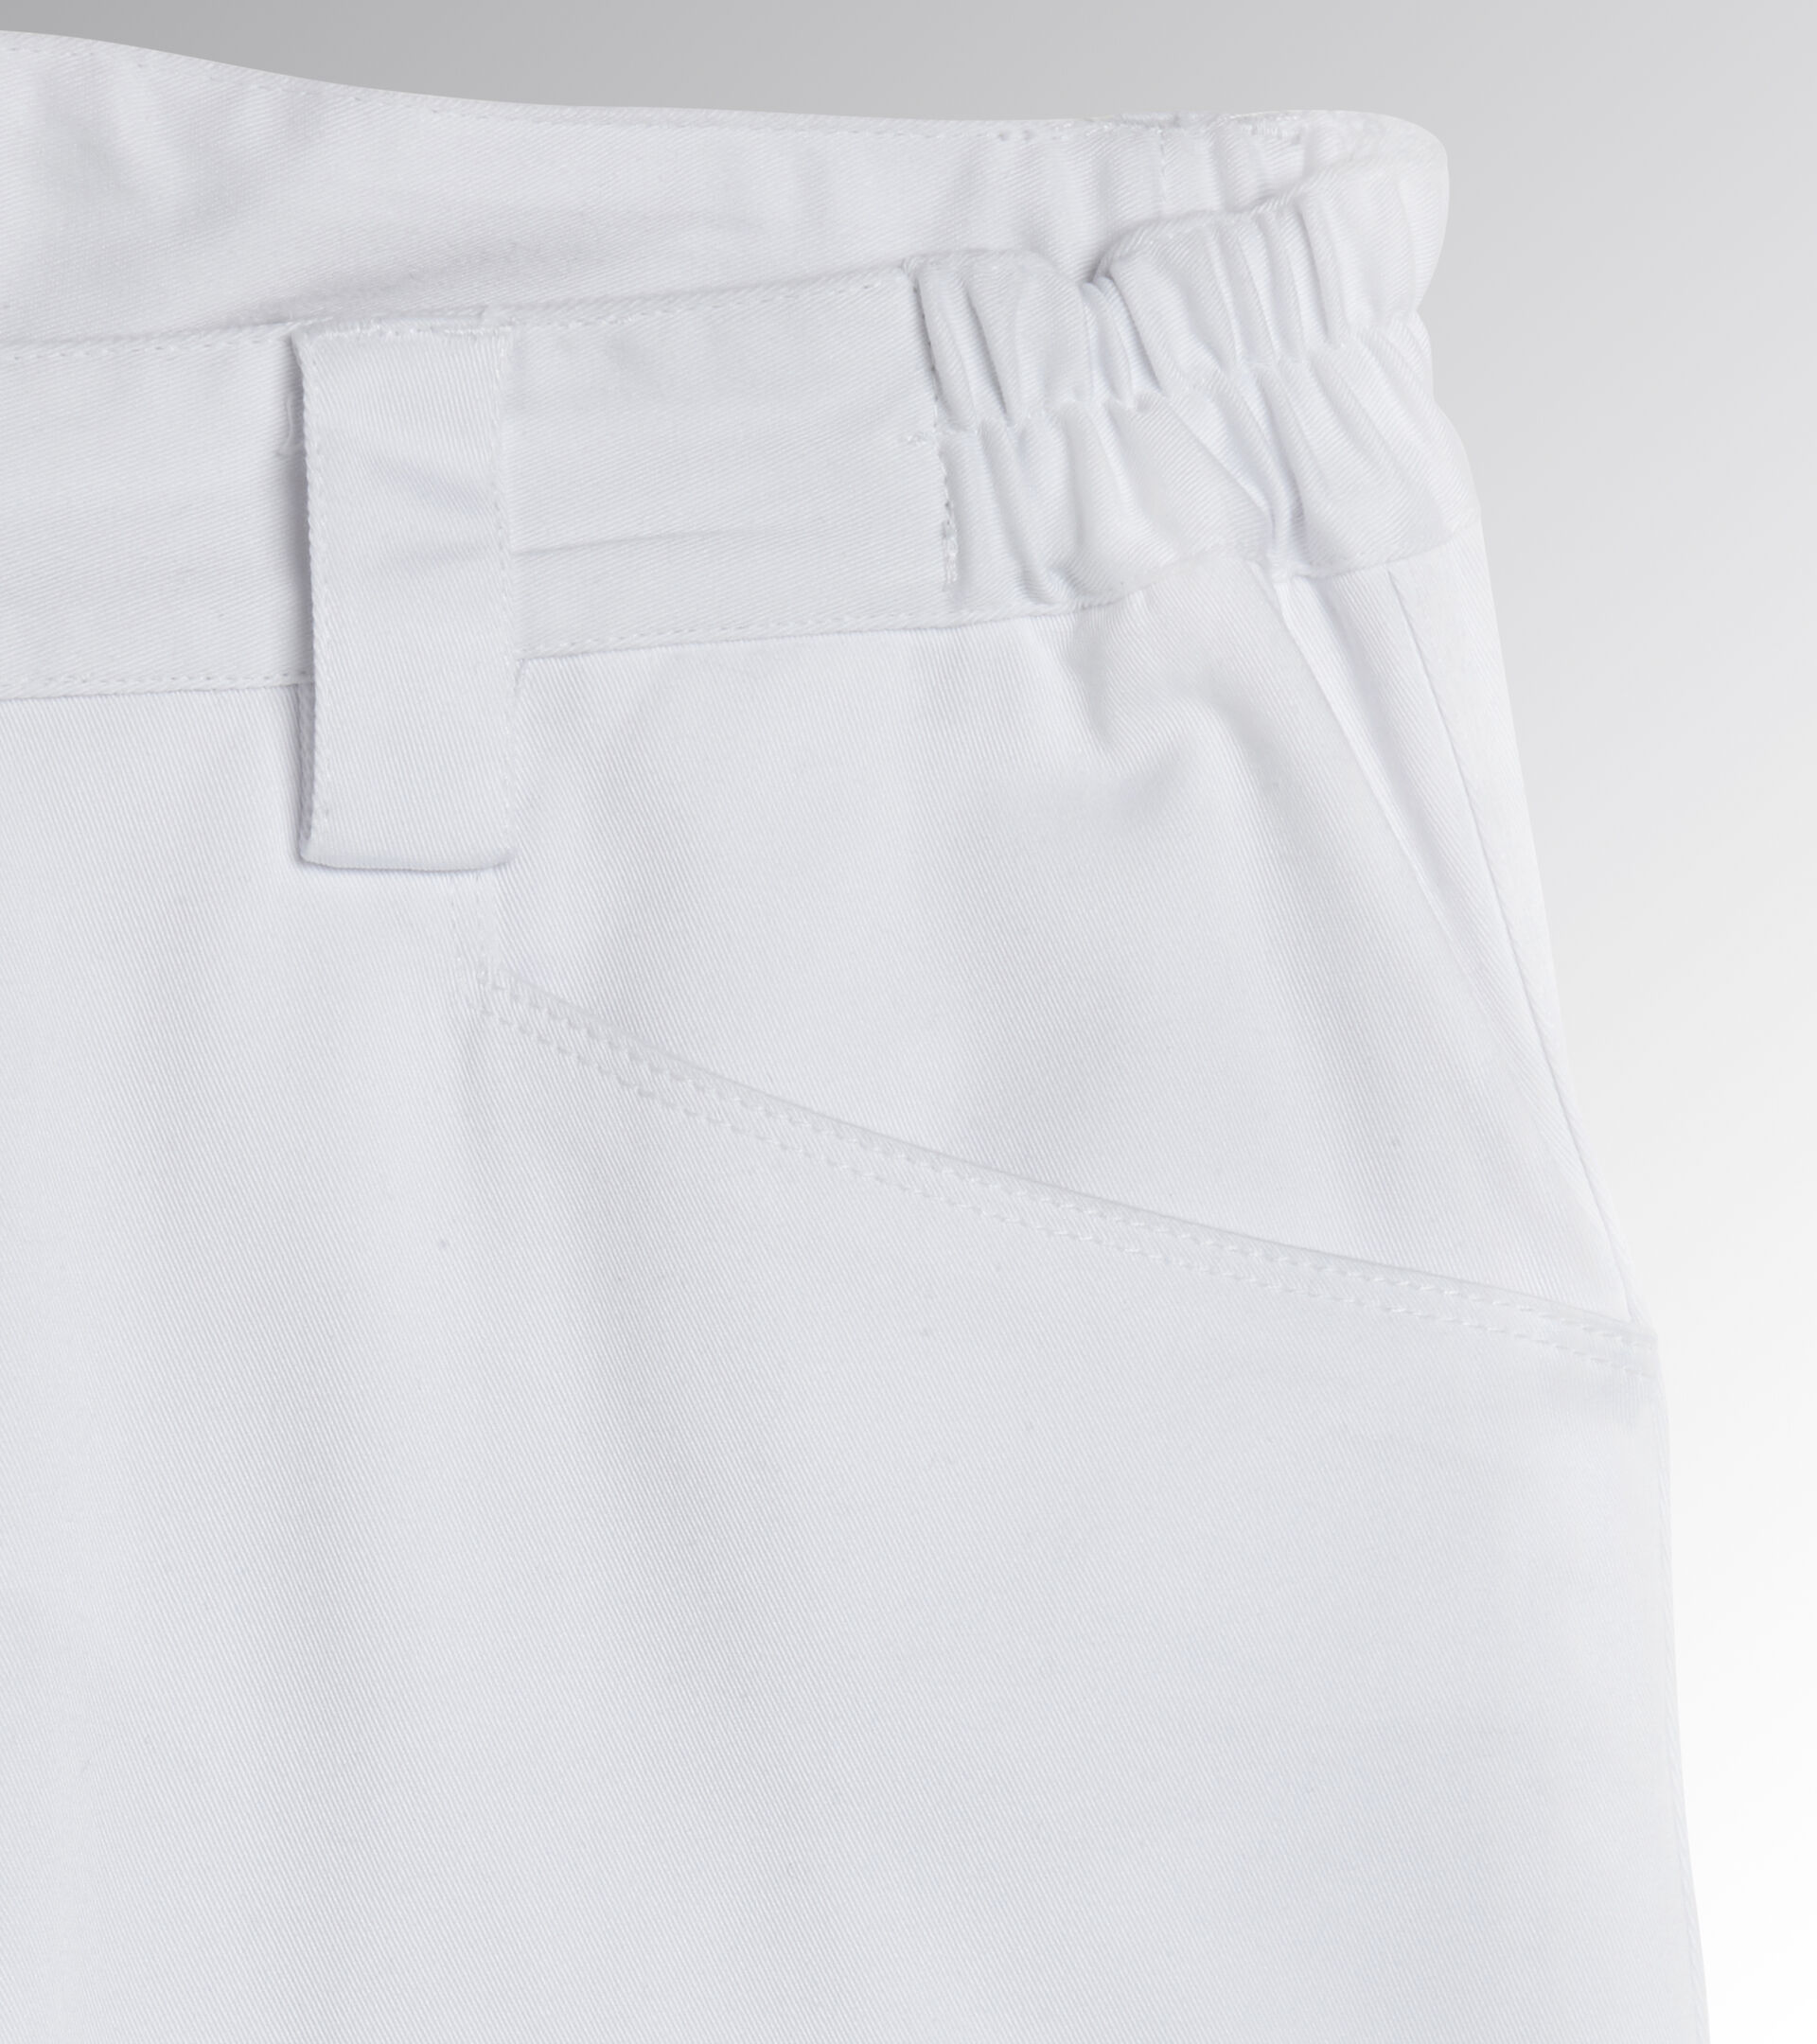 Work trousers PANT STAFF STRETCH CARGO OPTICAL WHITE - Utility